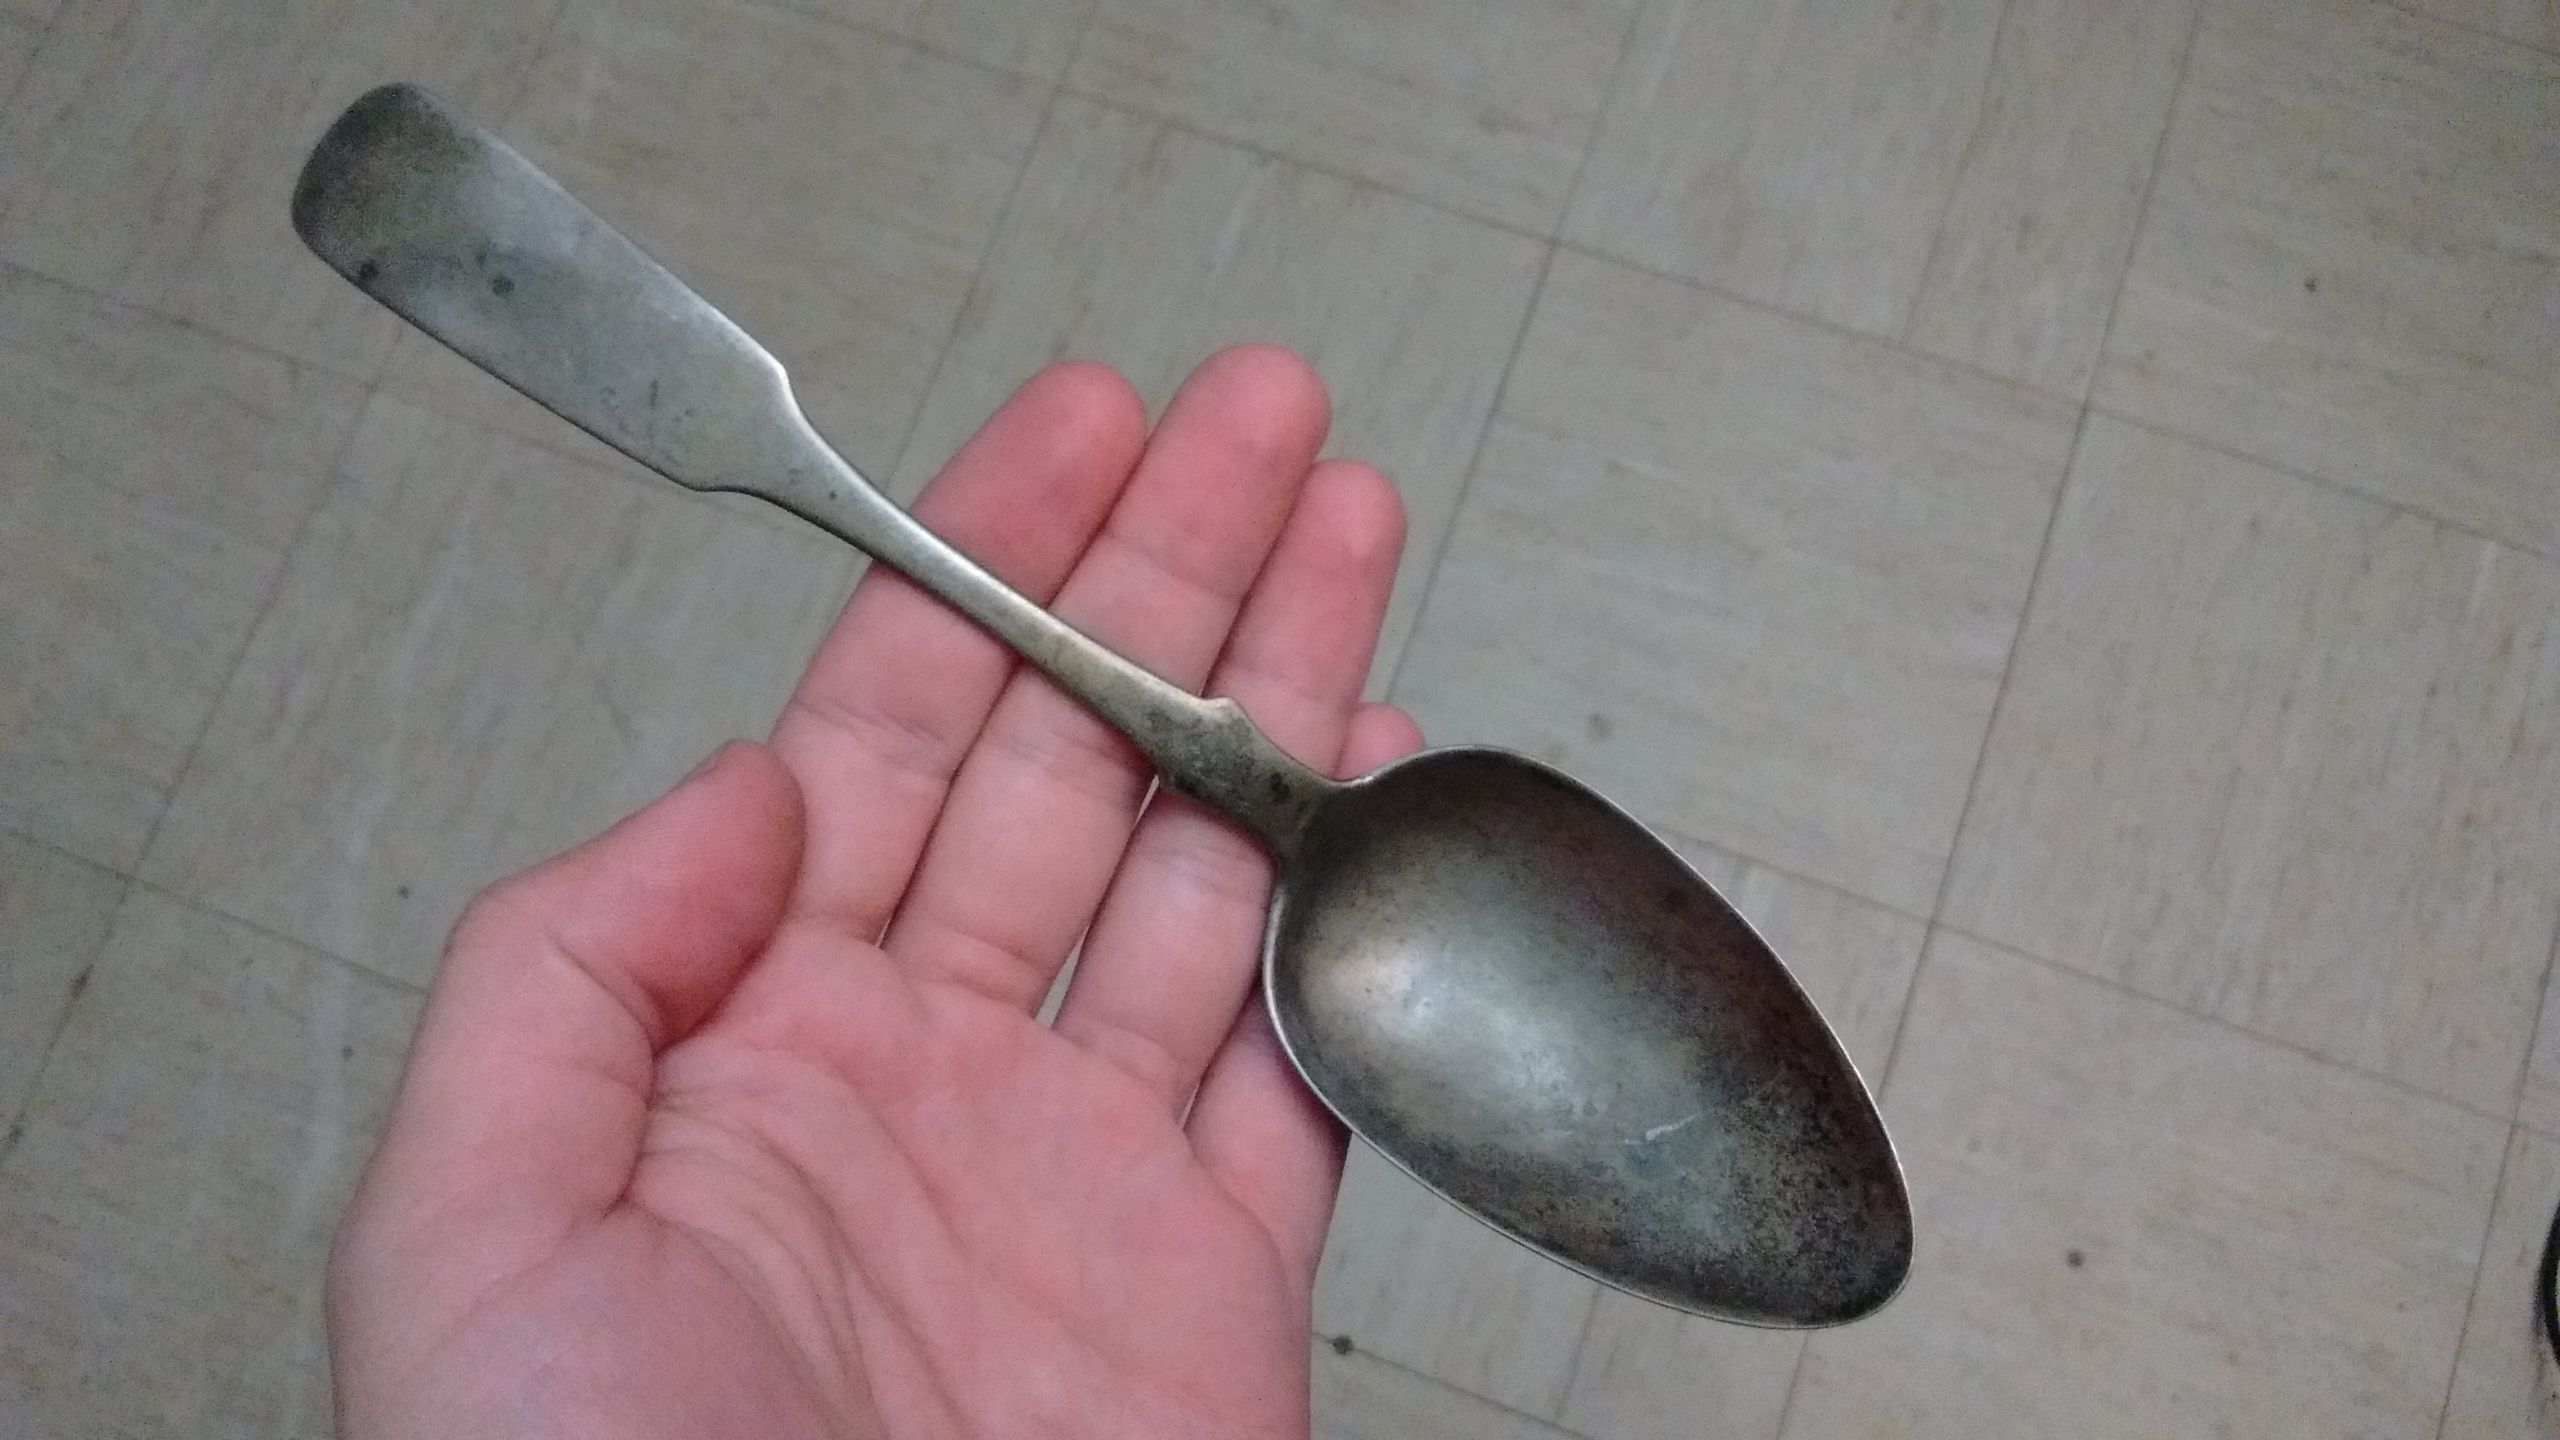 12 Loth (75% silver) Eastern European serving spoon (Likely Romanian) circa 1850's-1880's. (Dump find)